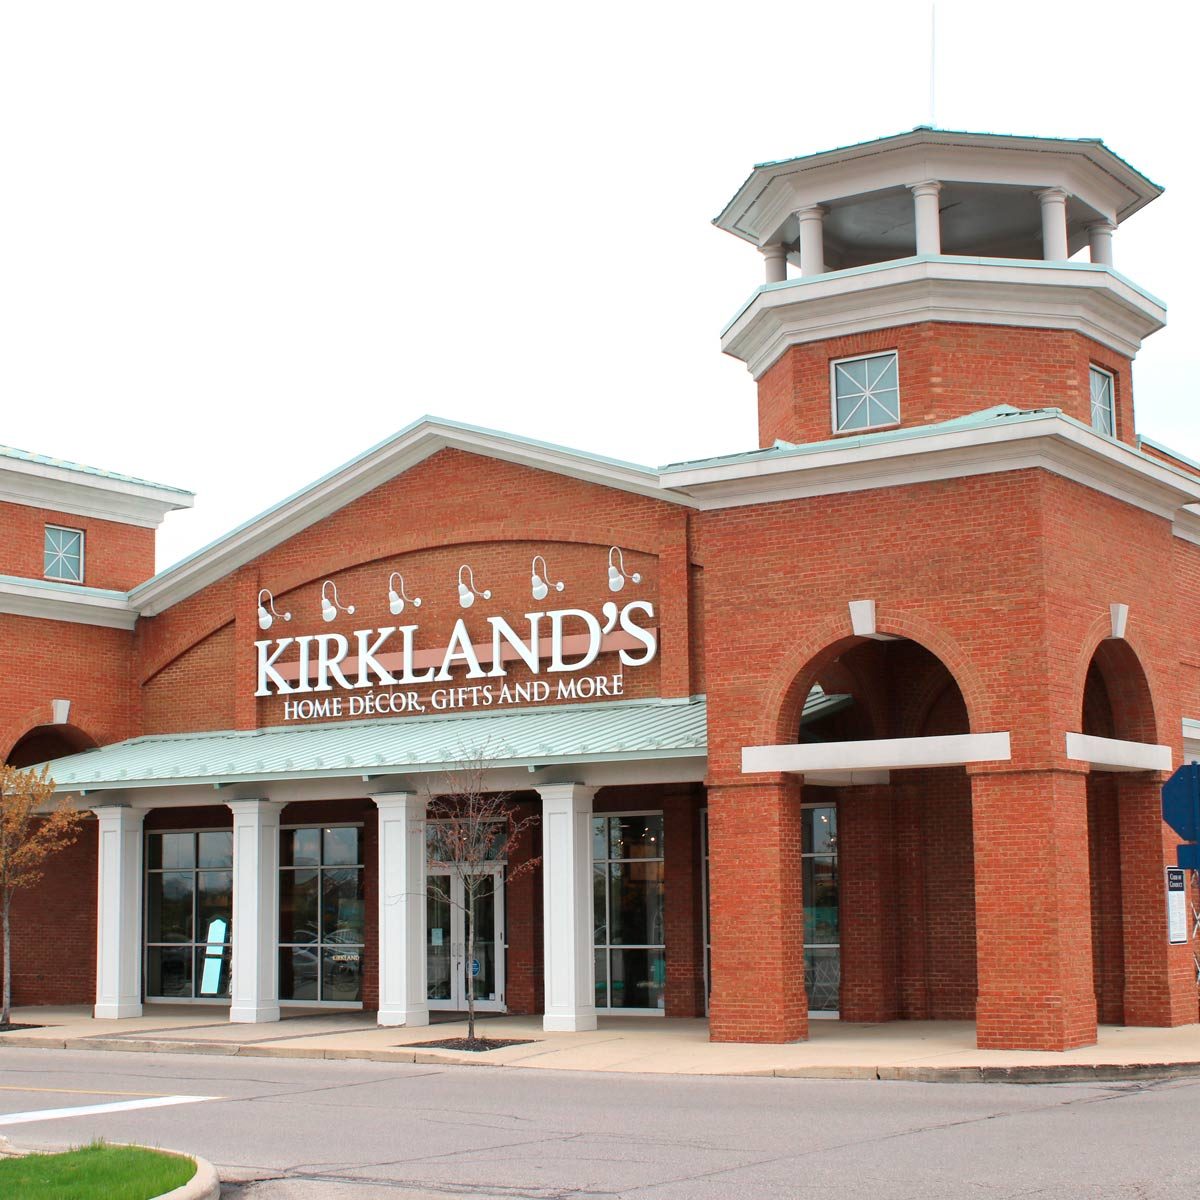 Does Costco Own Kirkland's Home Decor Stores?